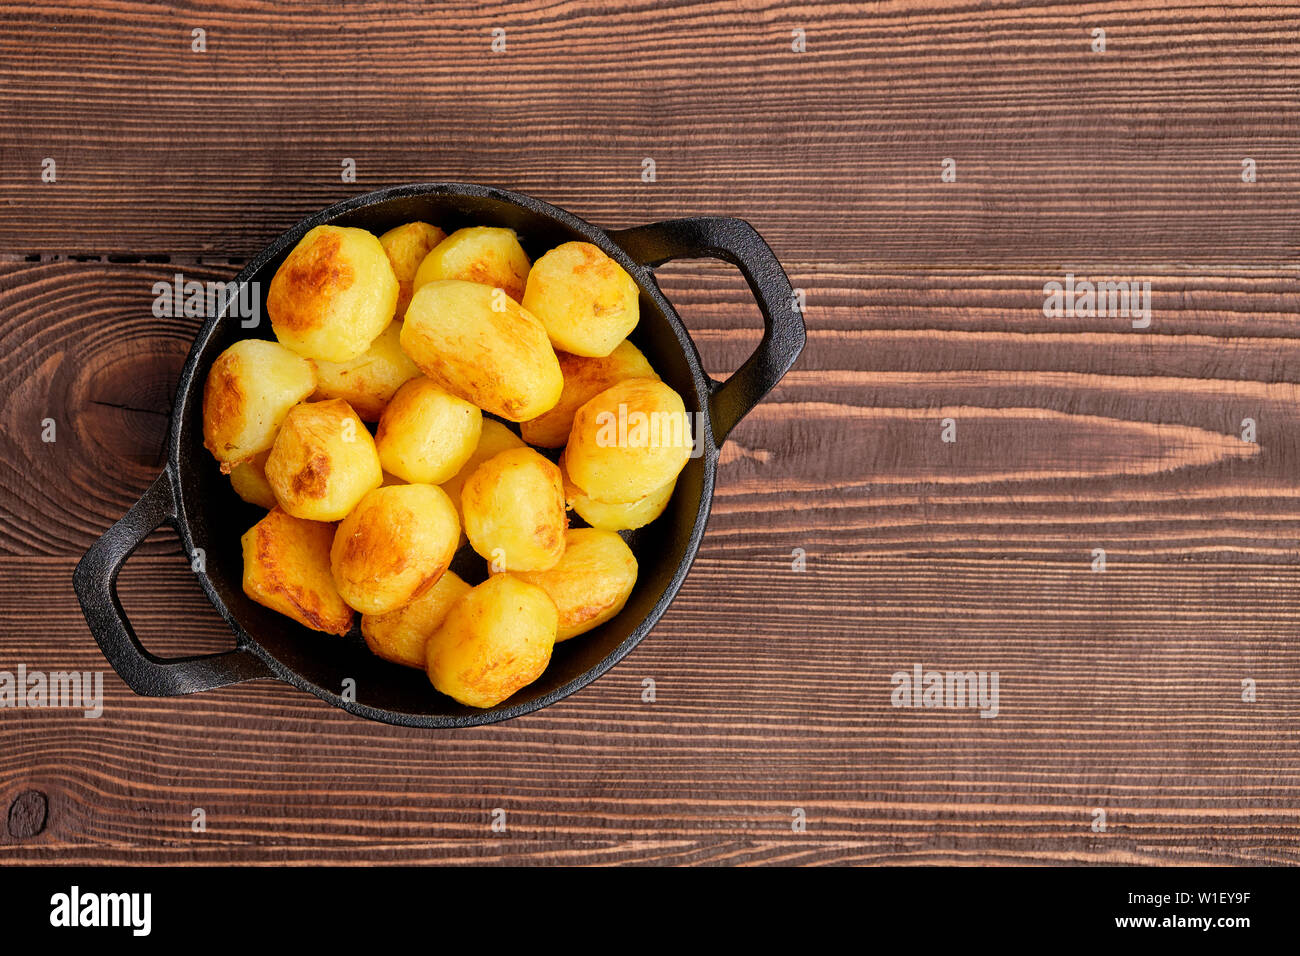 https://c8.alamy.com/comp/W1EY9F/baked-potato-in-cast-iron-skillet-on-natural-wooden-background-W1EY9F.jpg